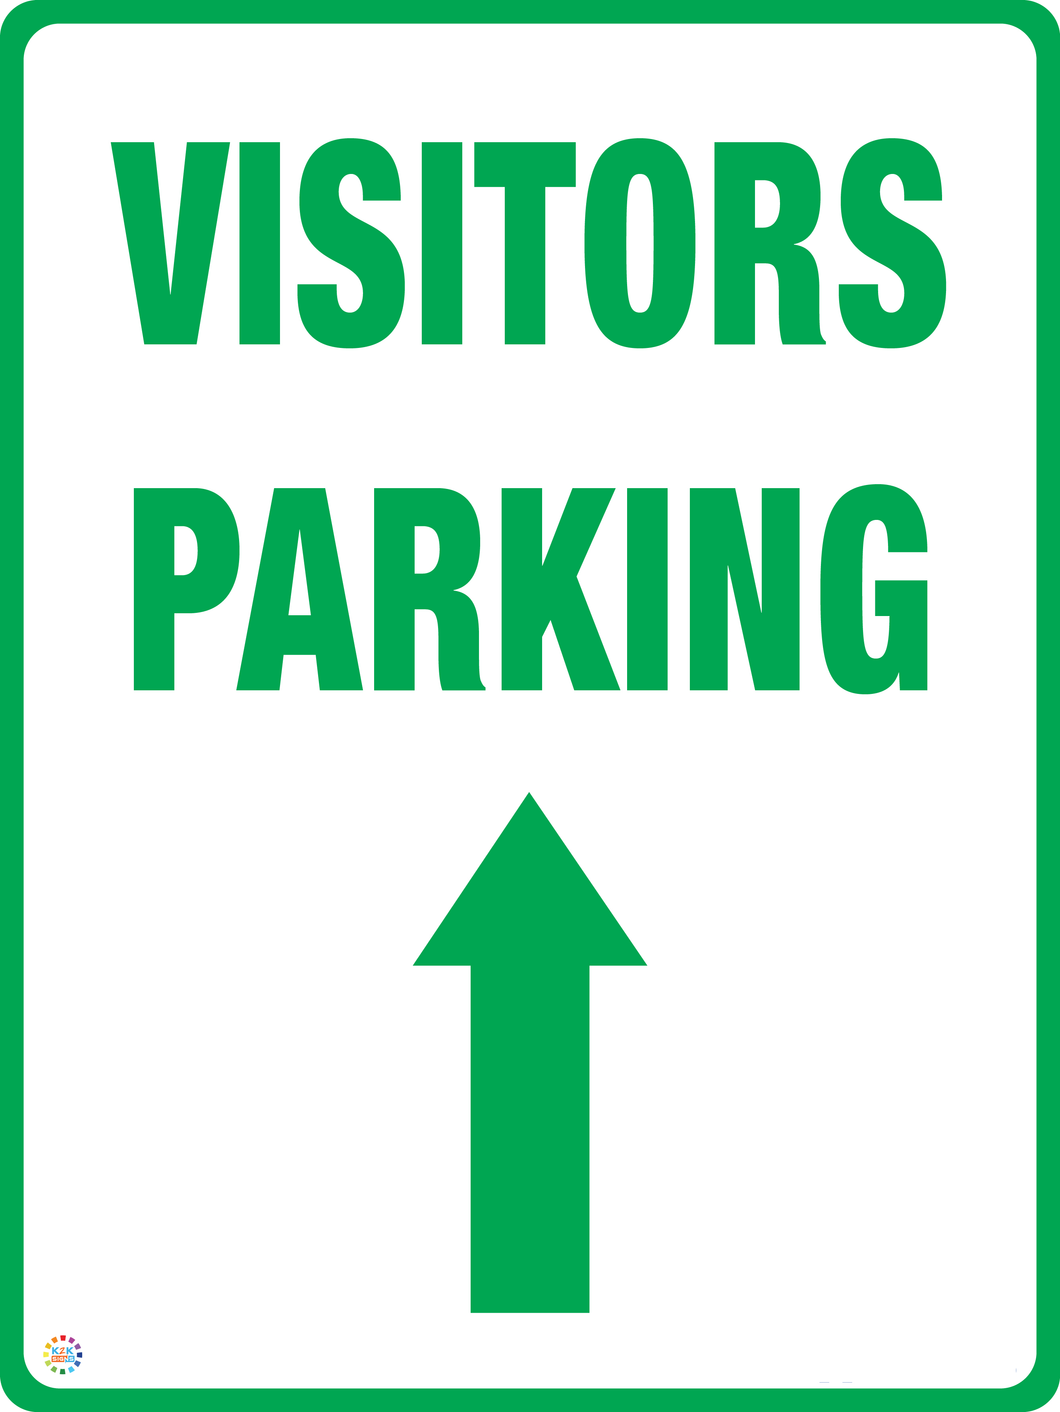 Visitors Parking (Straight Arrow) Sign